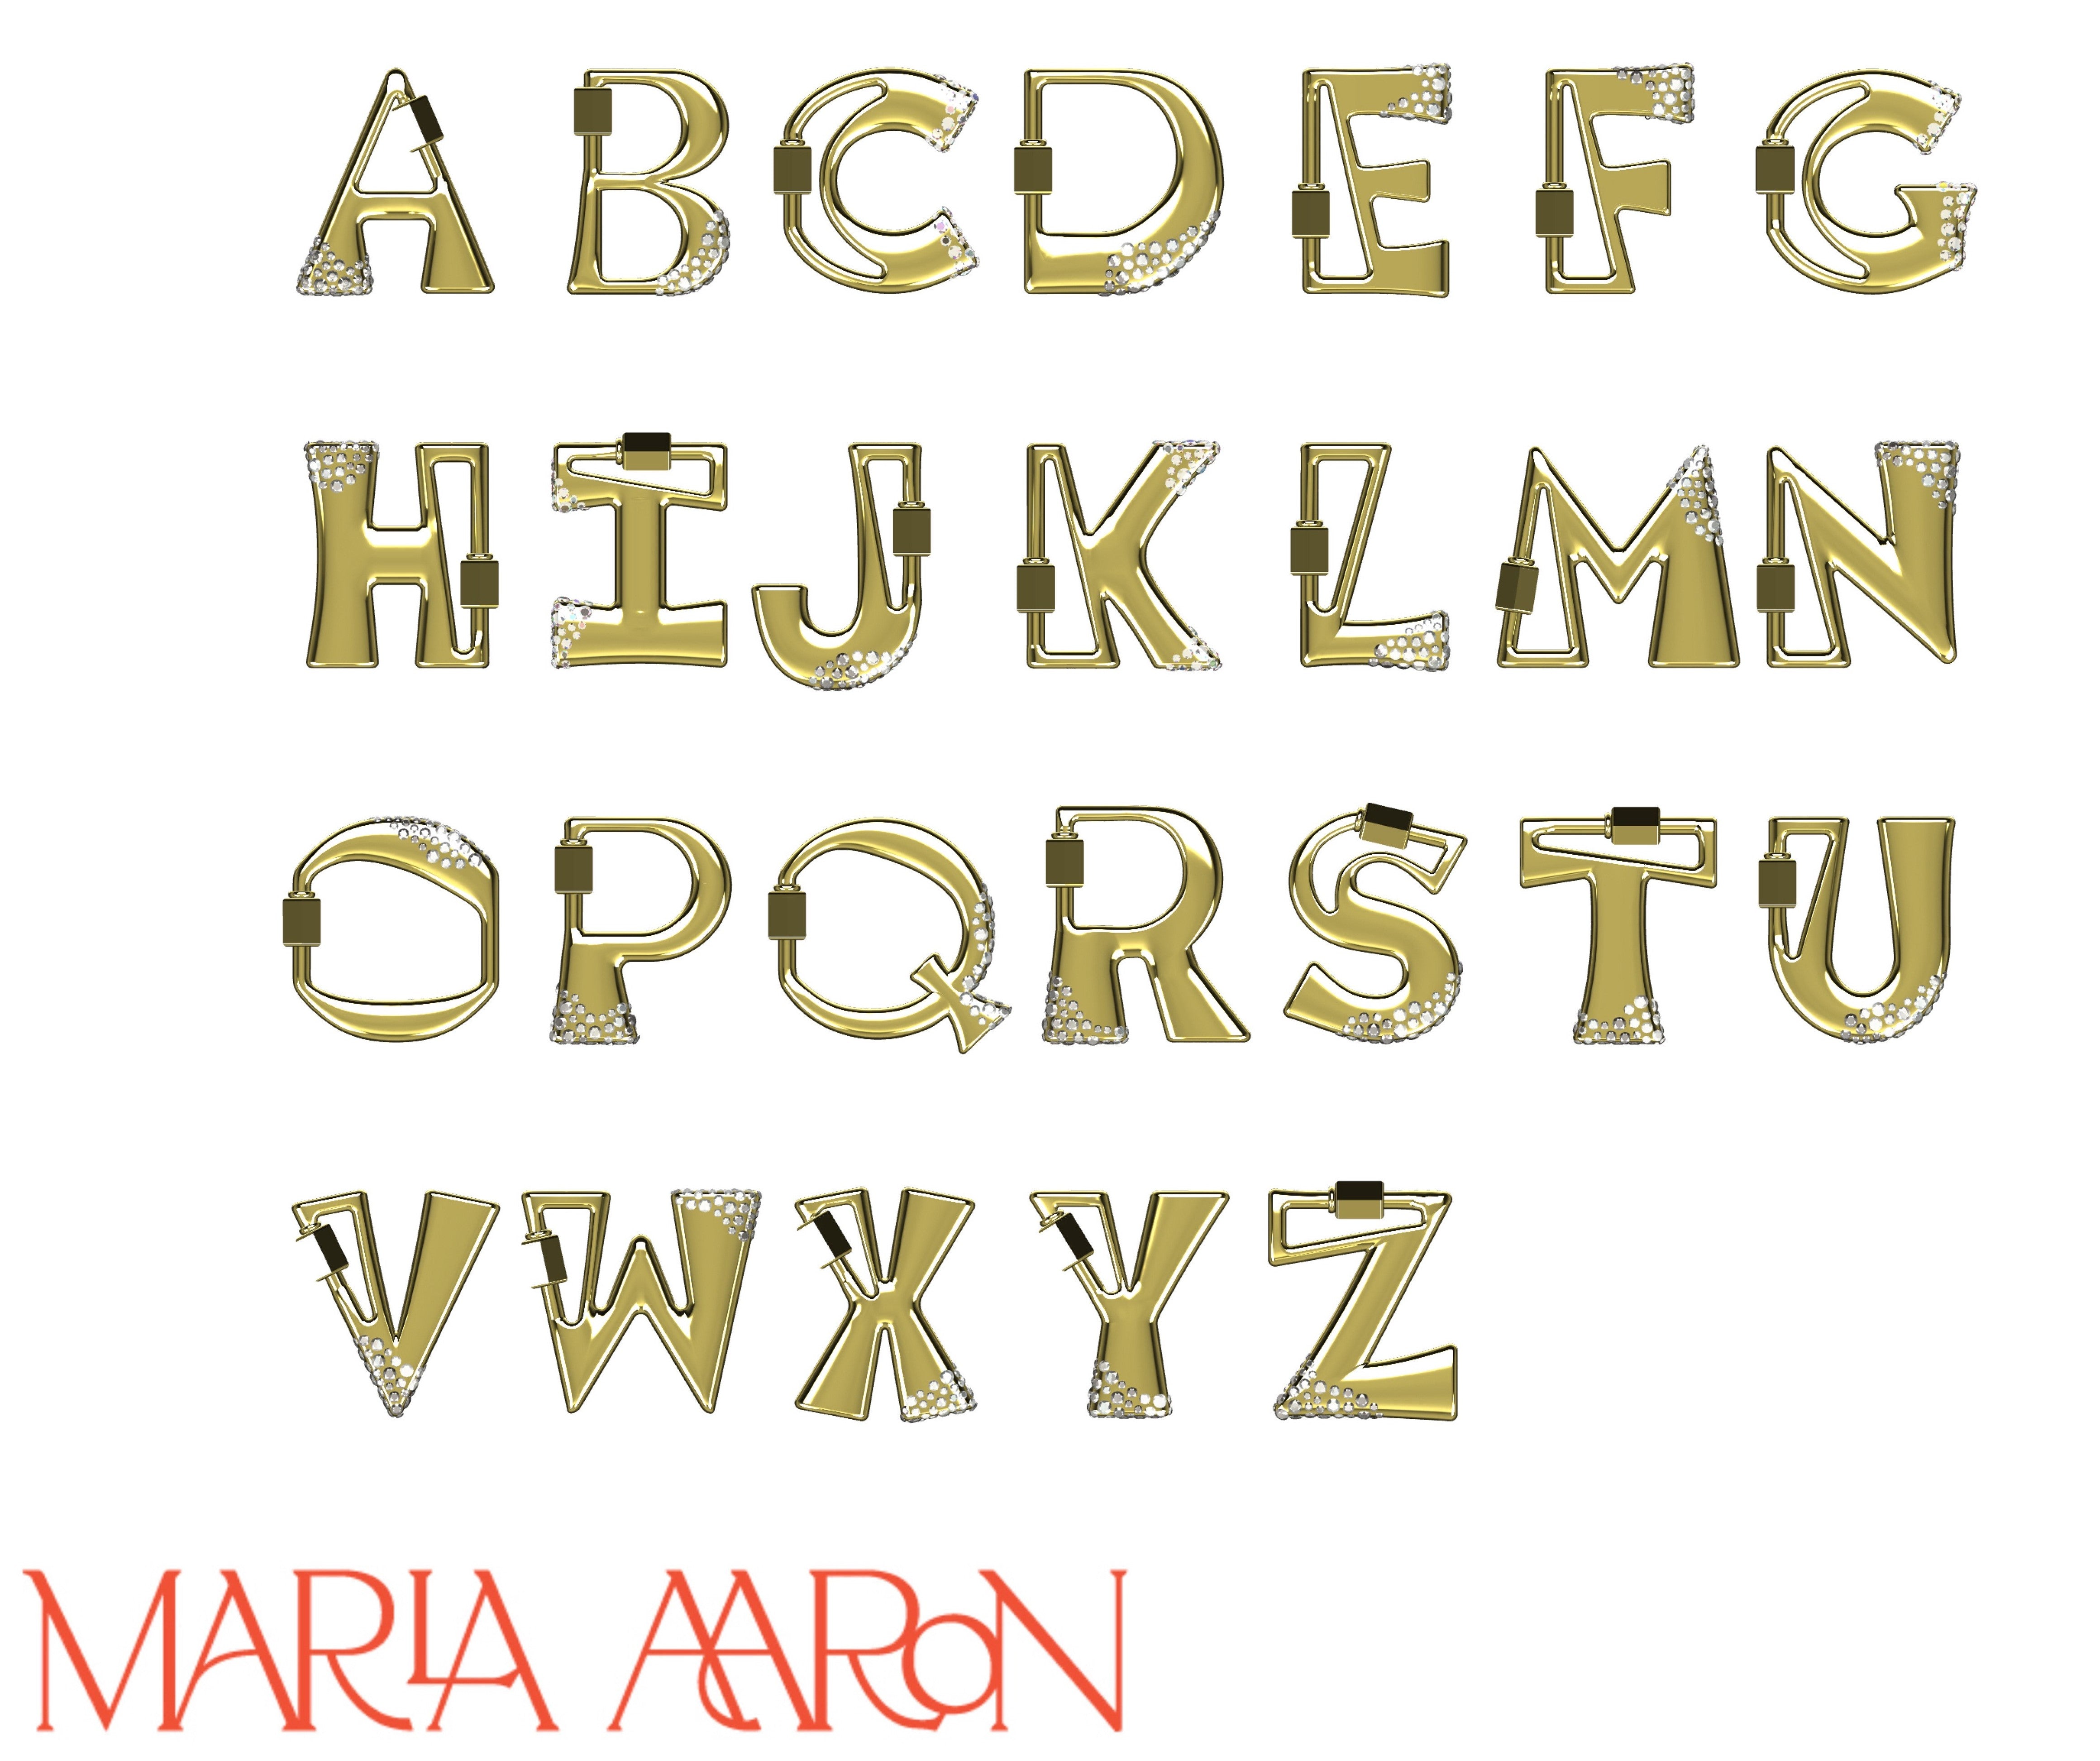 Gold locks of every letter of the alphabet including D charm against white backdrop with Marla Aaron logo in bottom left corner